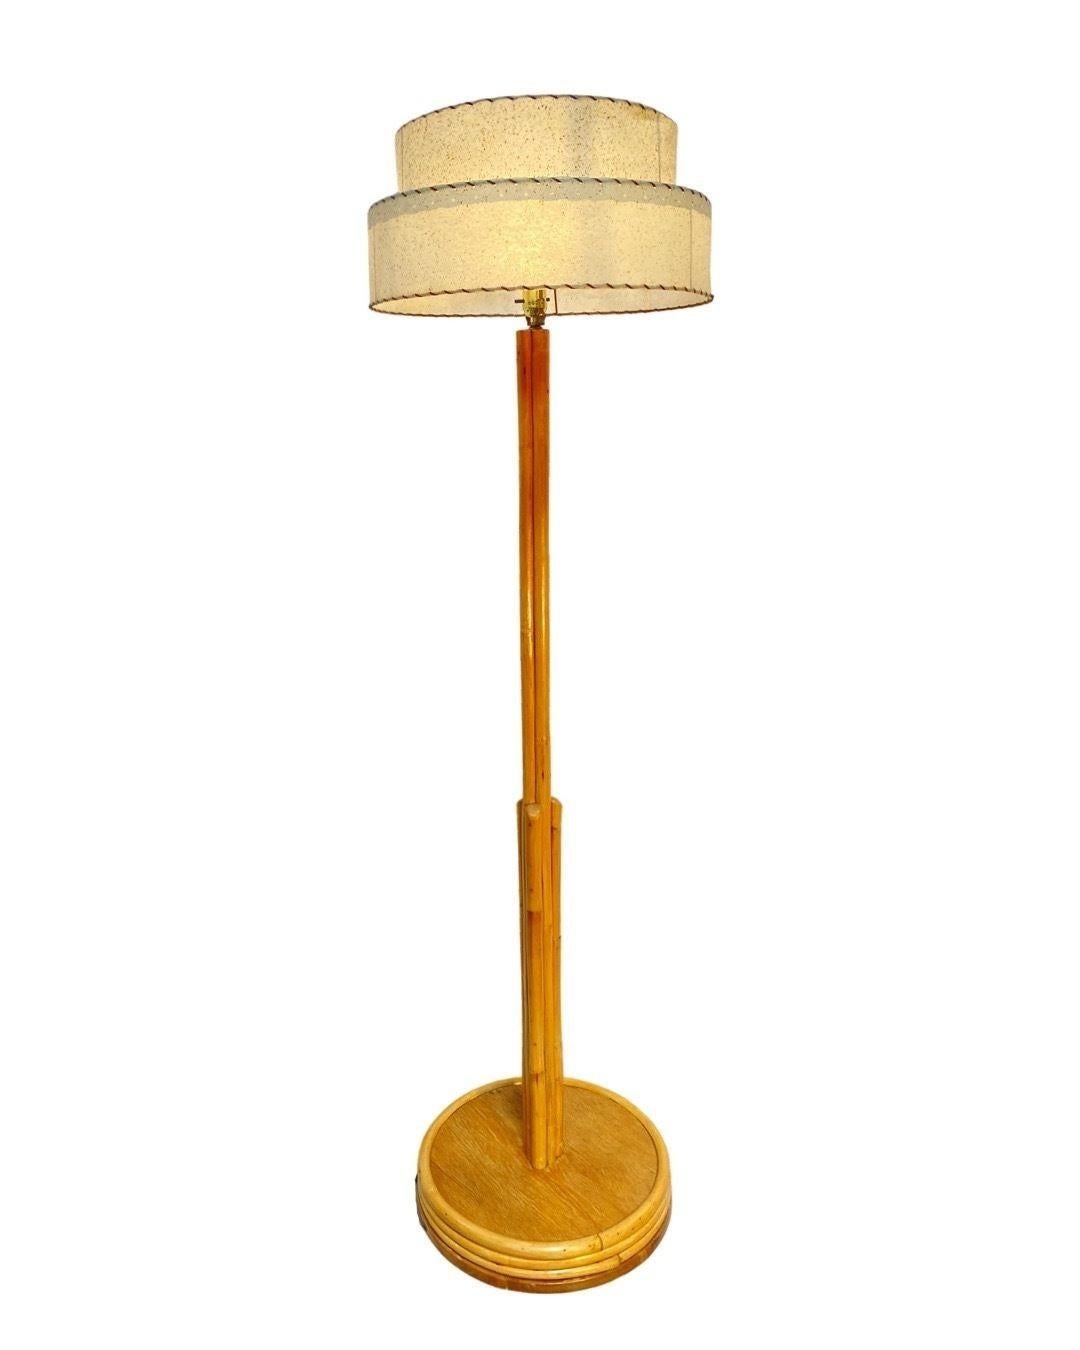 Restored Mid Century Pole Rattan Floor Lamp w/ Mahogany Base In Excellent Condition For Sale In Van Nuys, CA